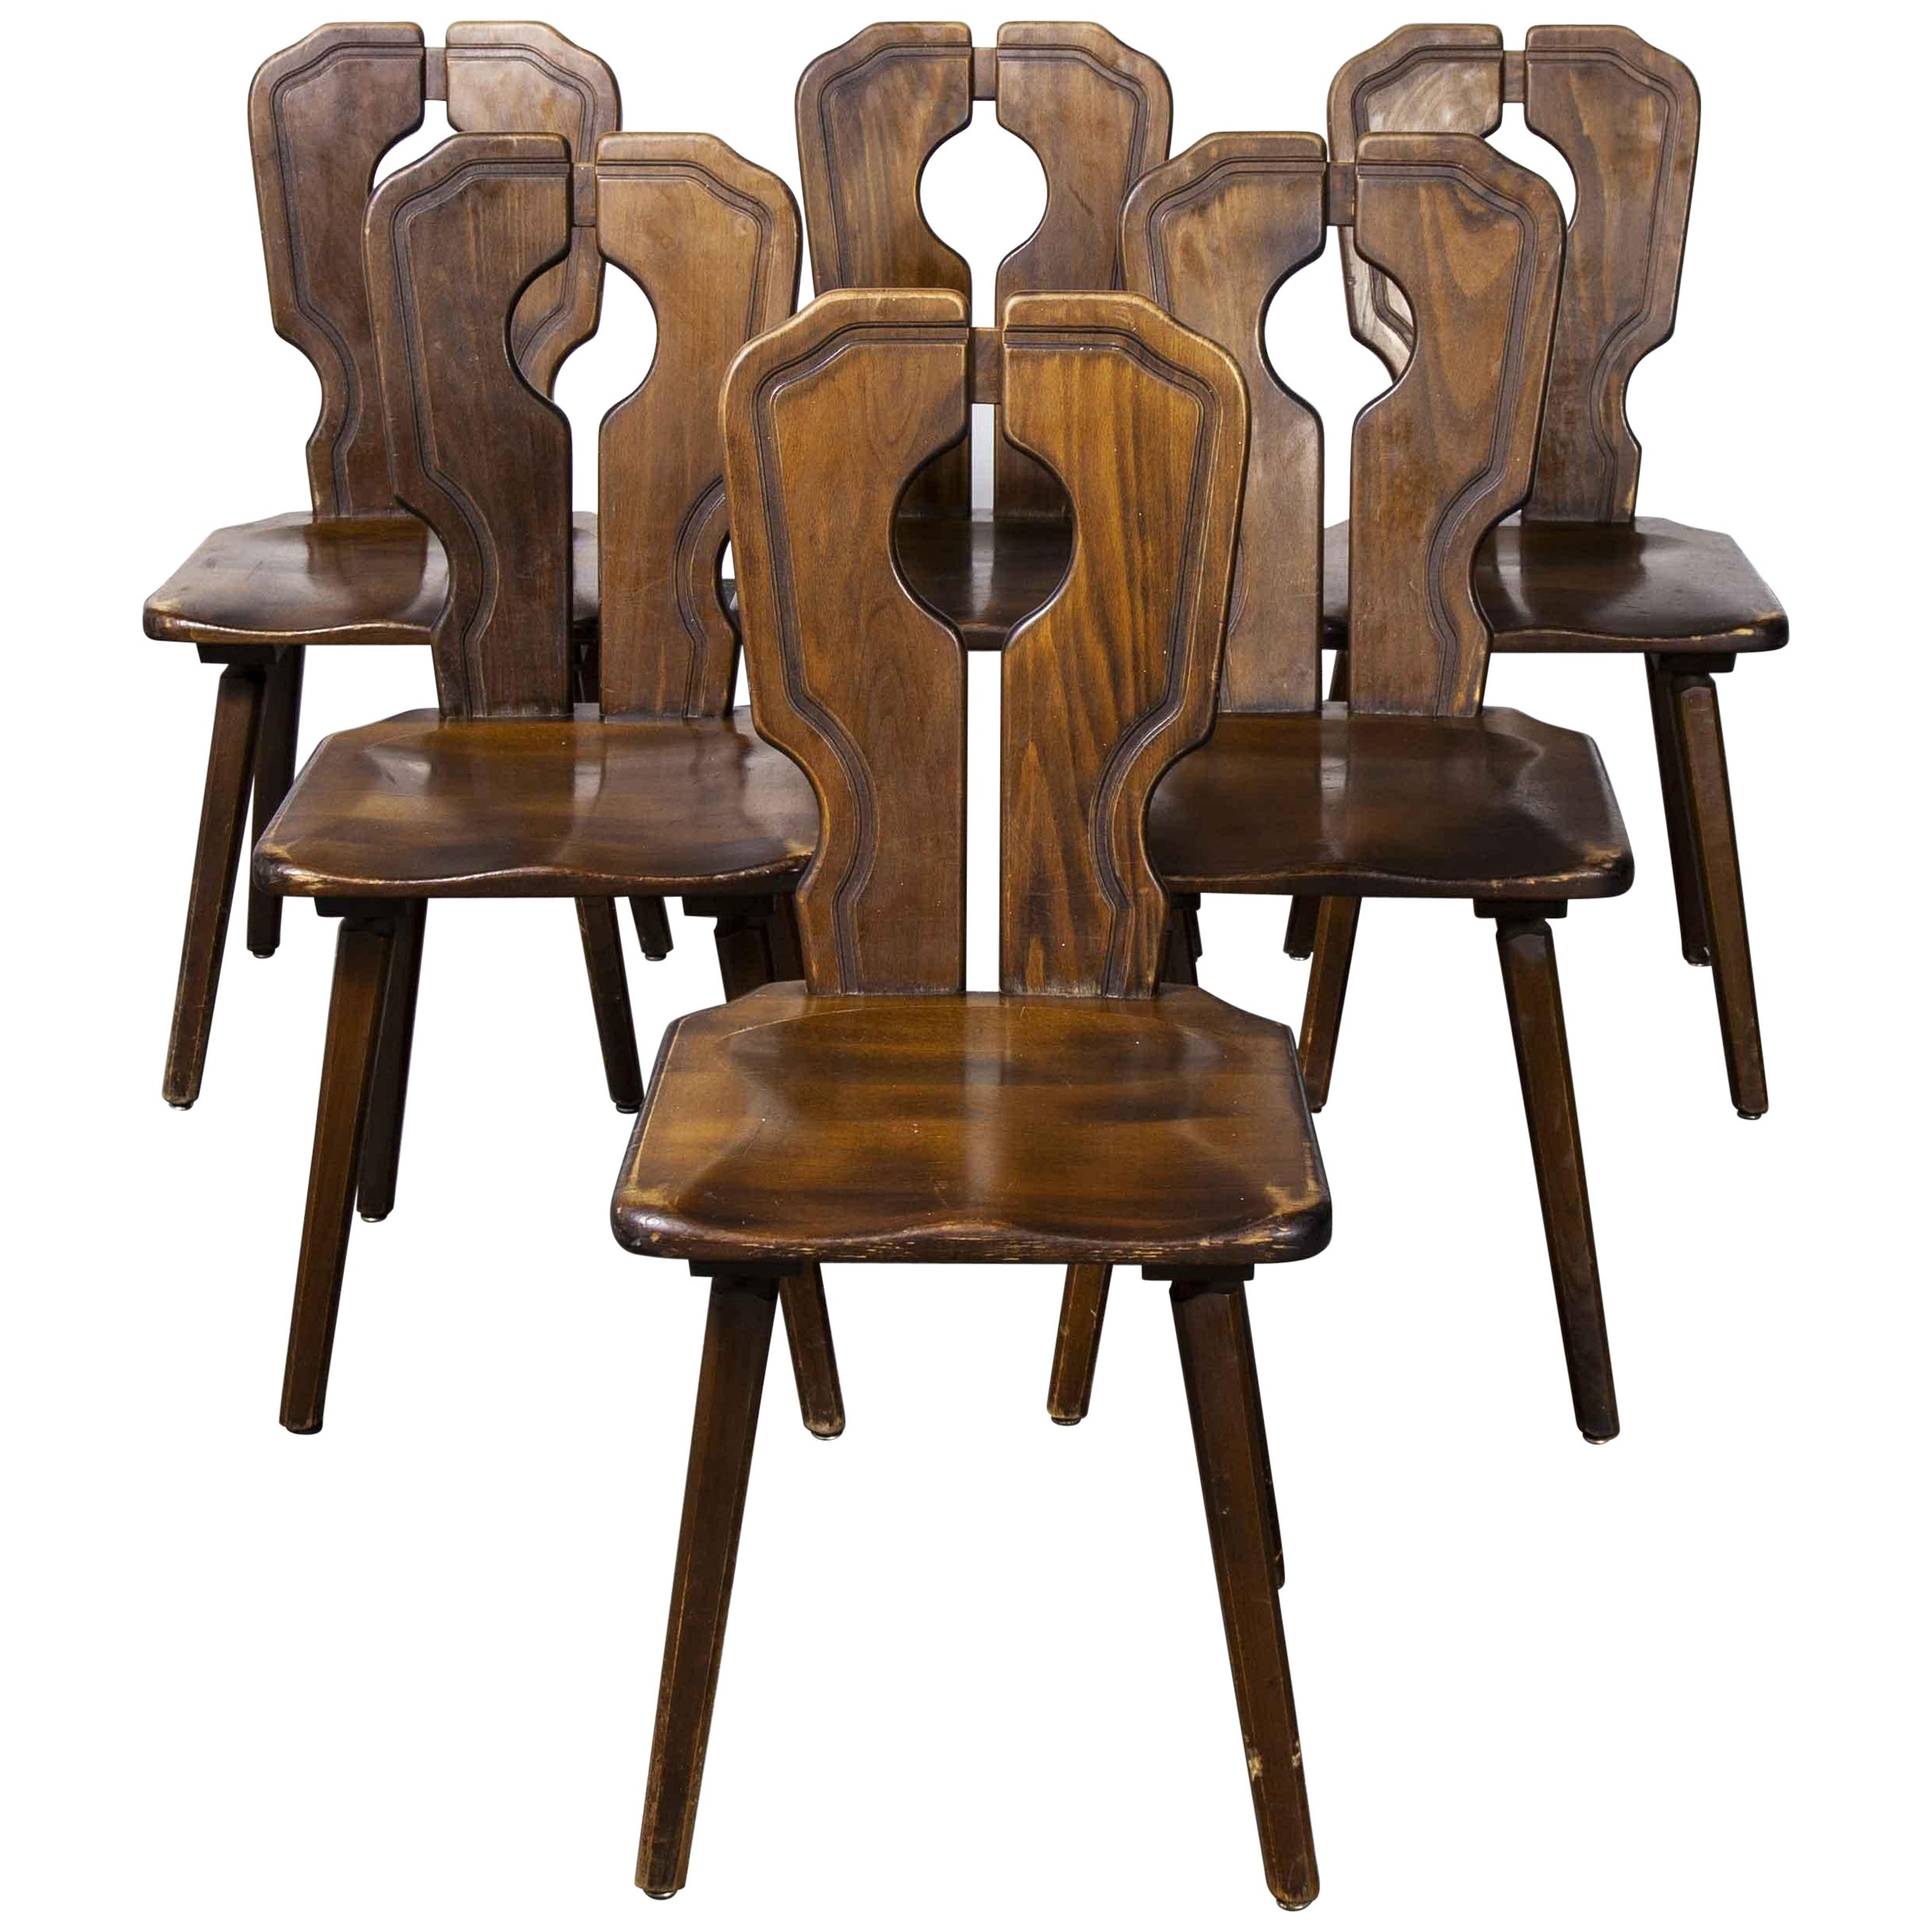 1950's Alsace Regional Open Back Dining Chair, Set of Six